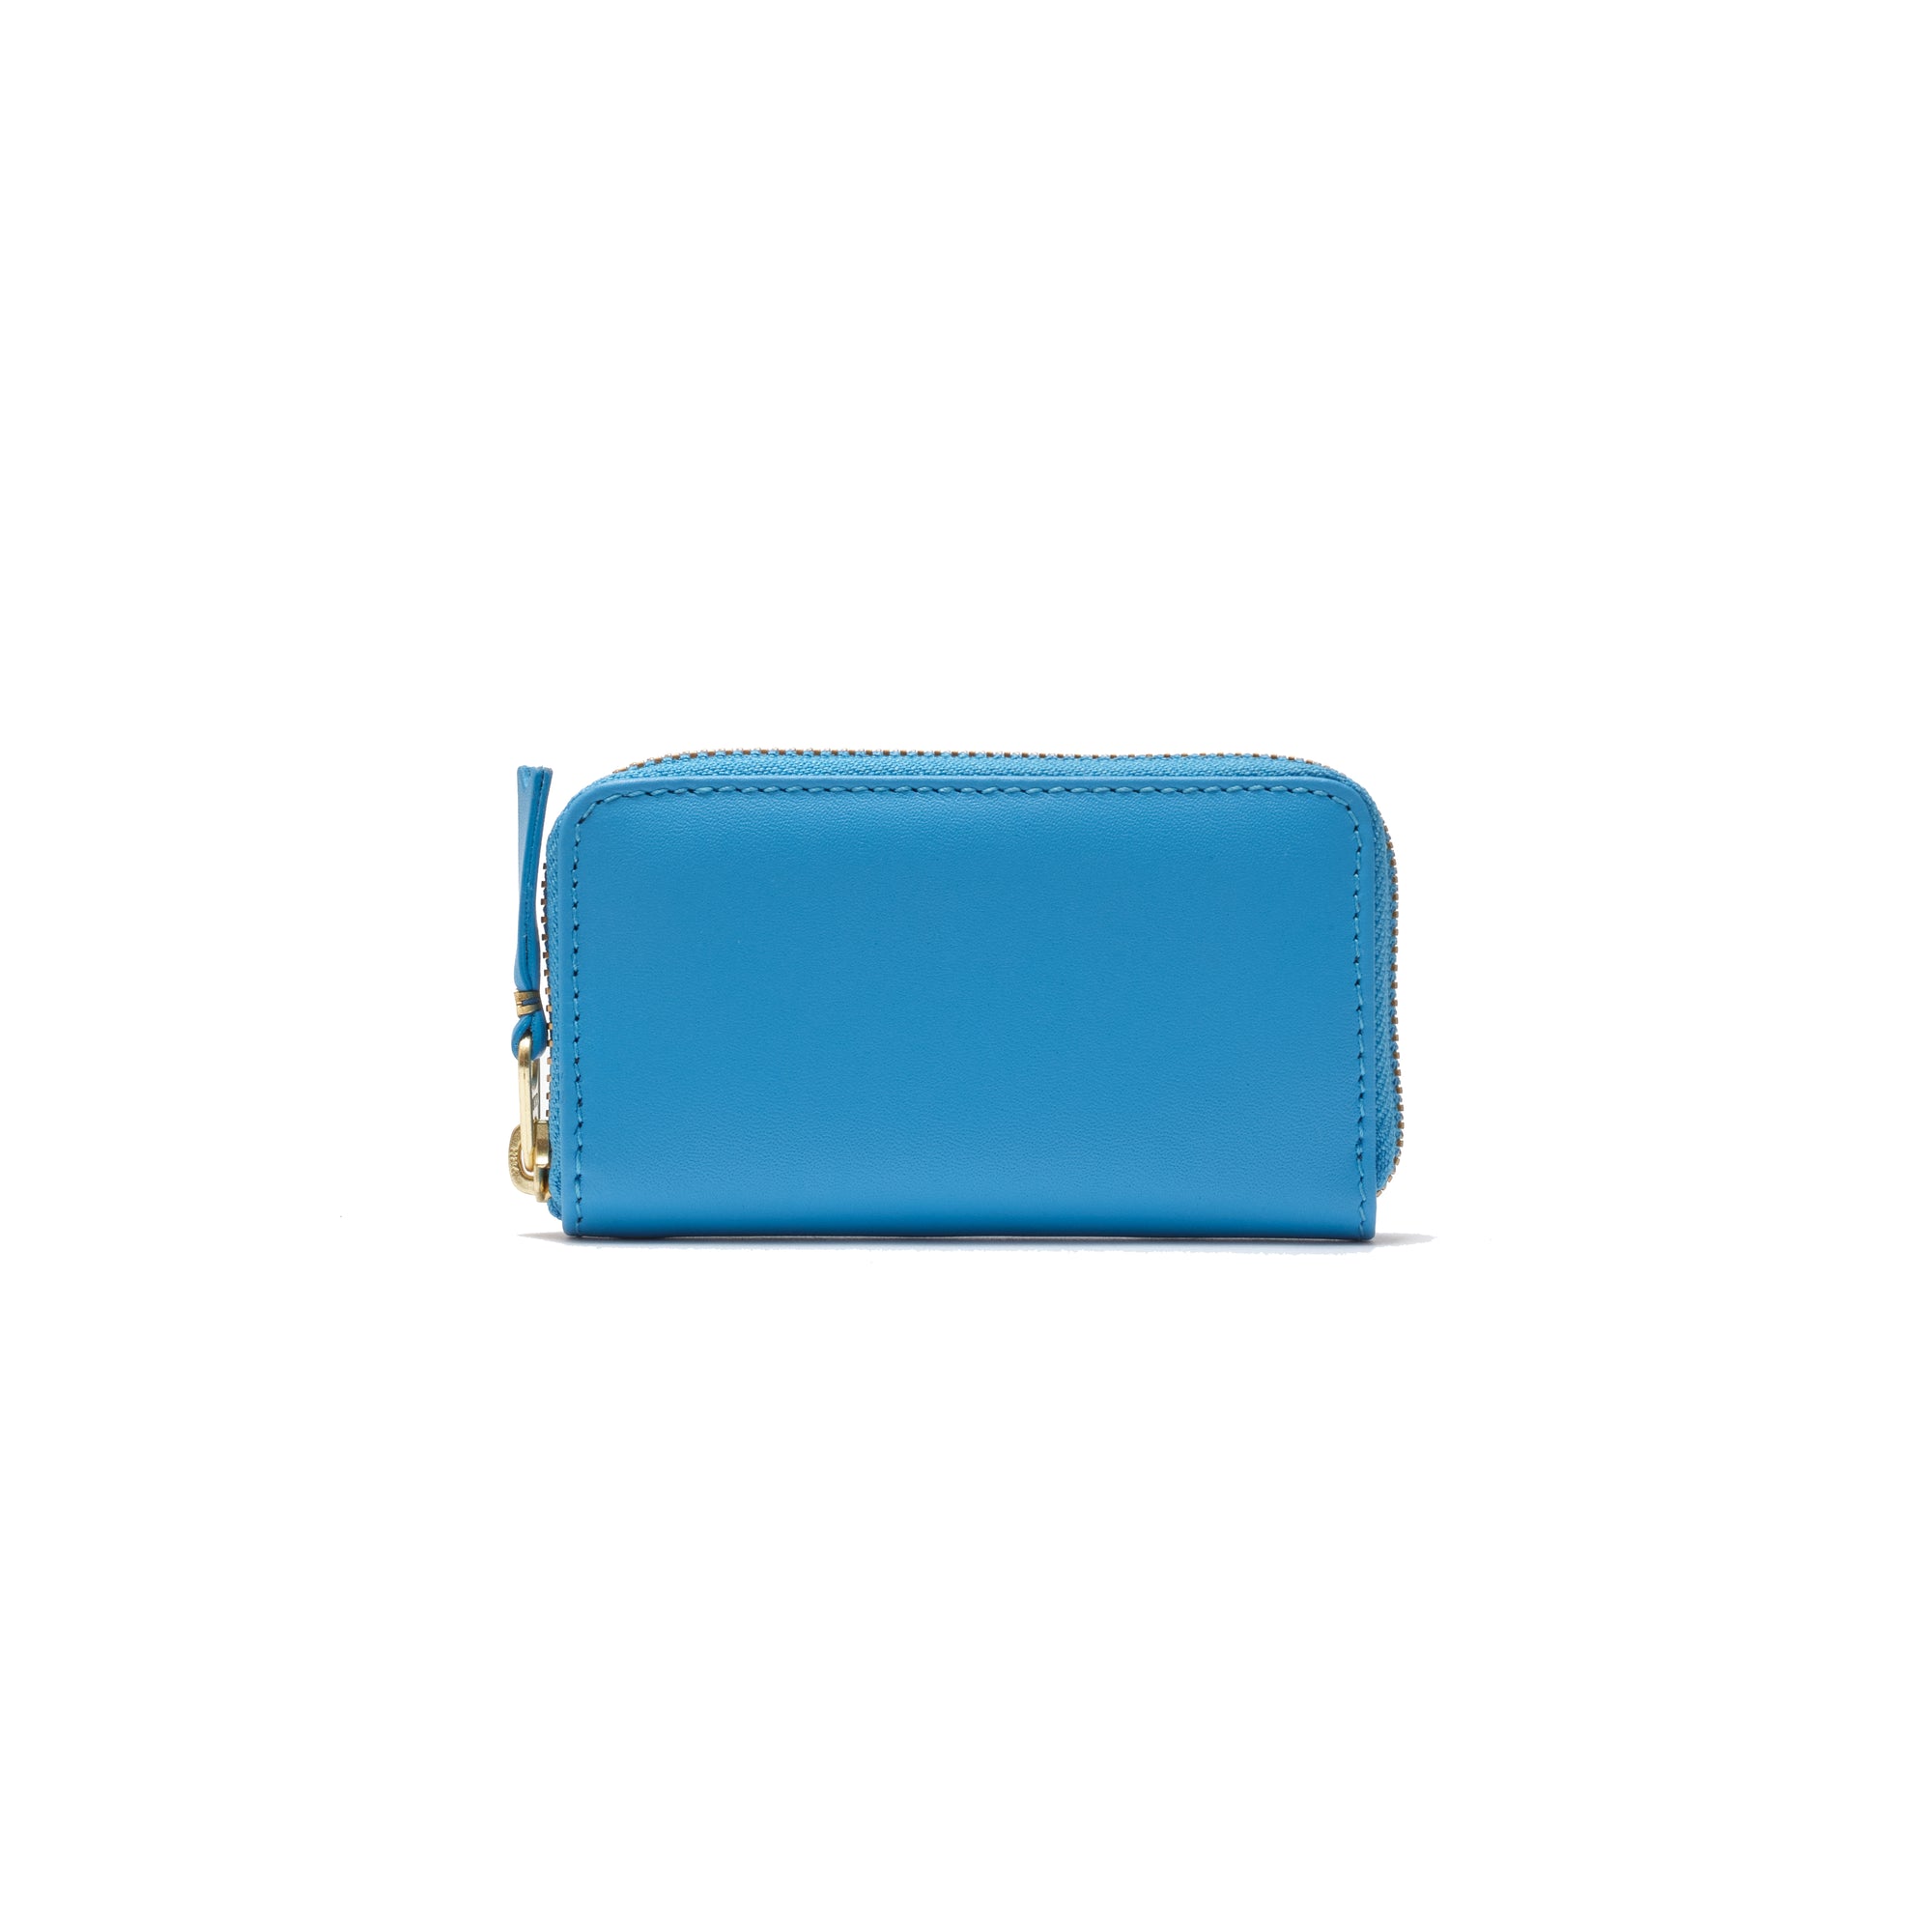 CDG WALLET - Colored Leather Line-8Z-A004 - (Blue) view 1